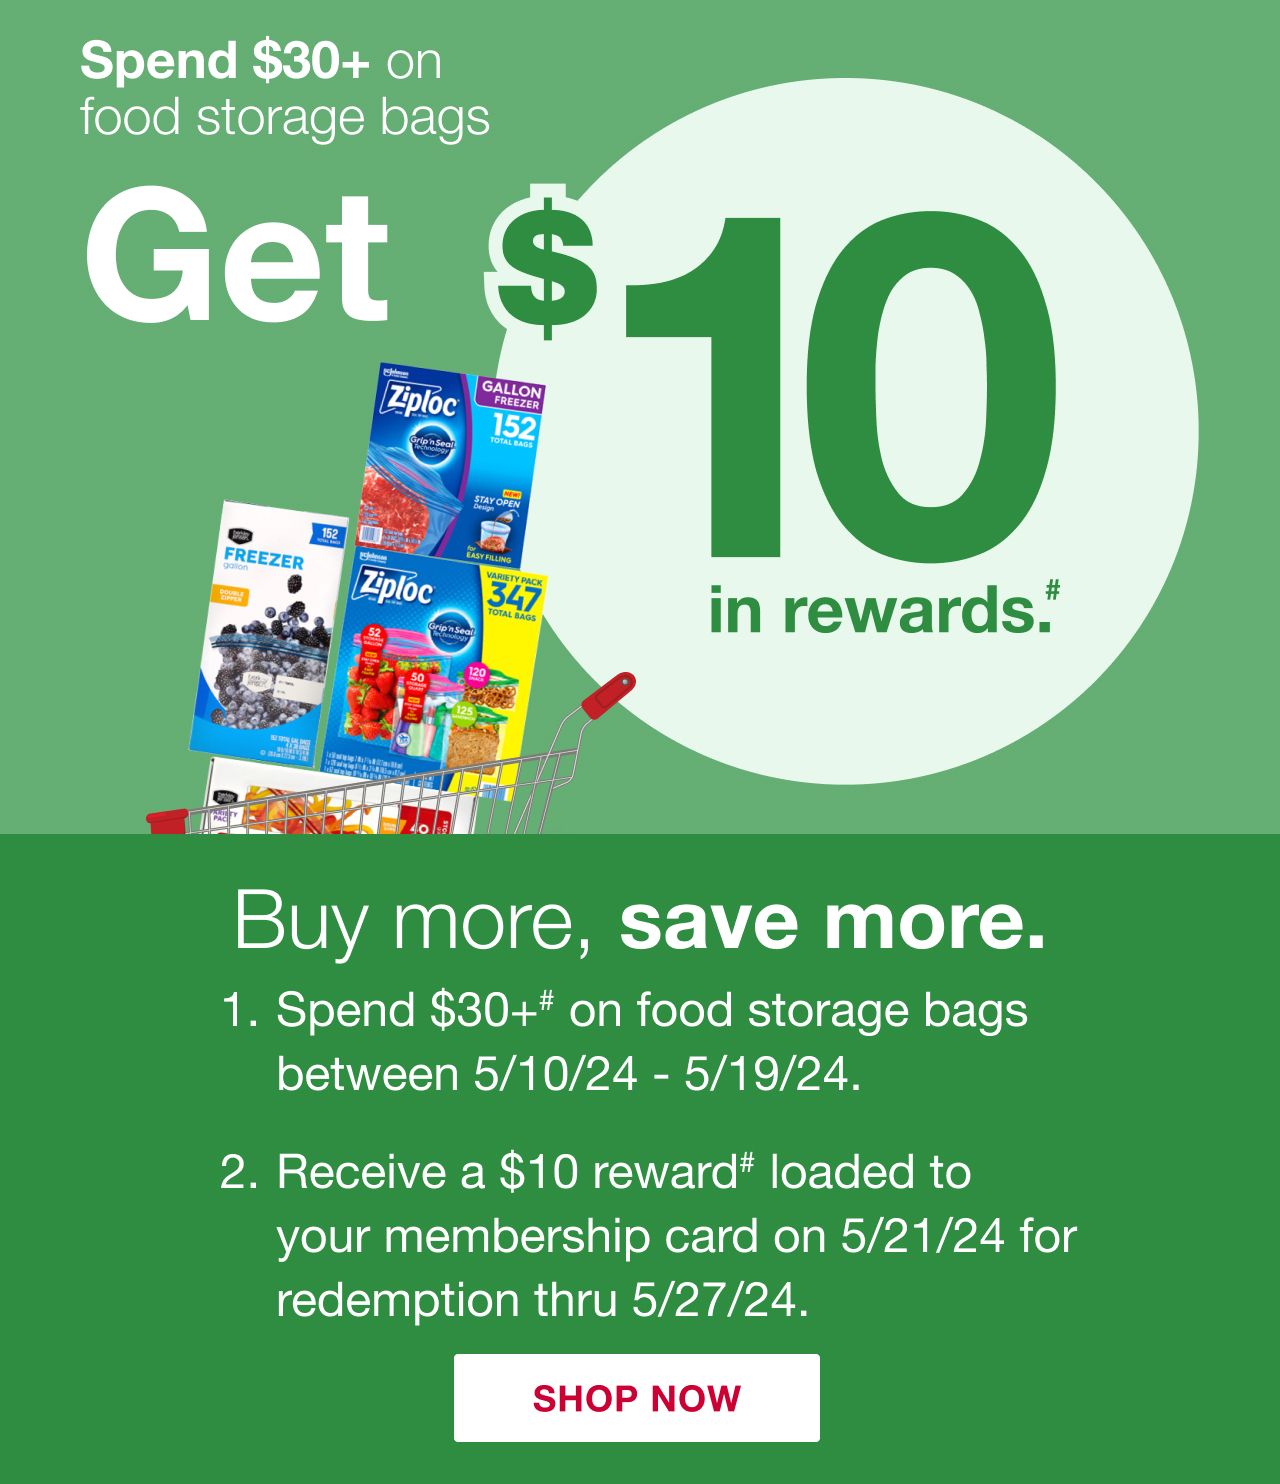 Spend $30+ on food storage bags and get $10 in rewards. Learn more below. Click to shop now